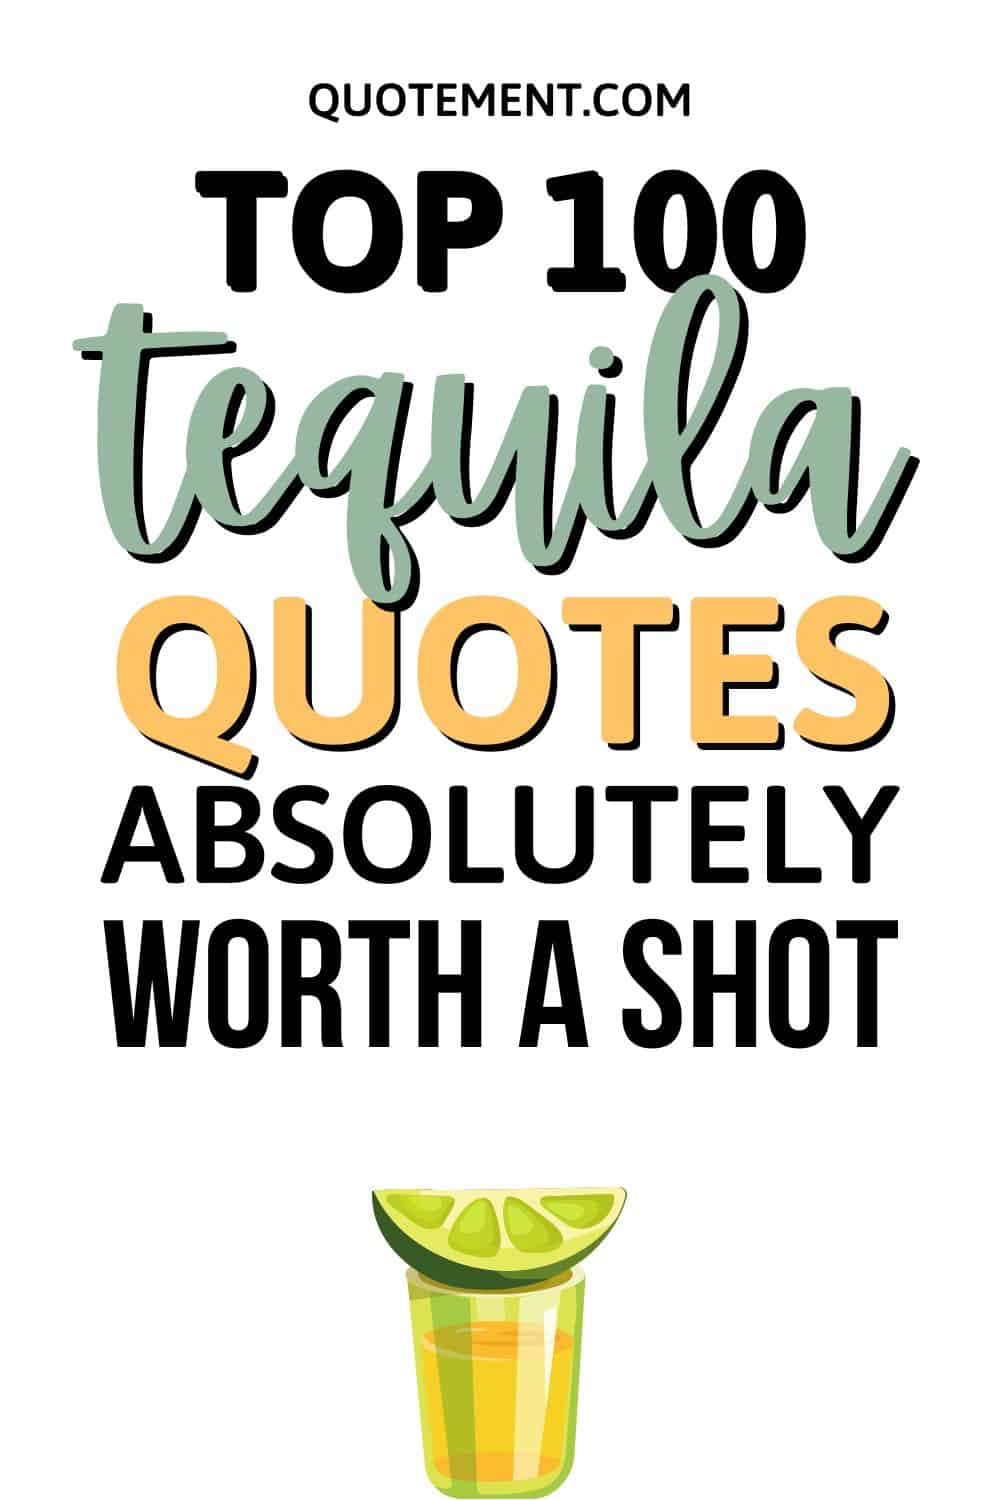 100 Tequila Quotes That Are Absolutely Worth A Shot!